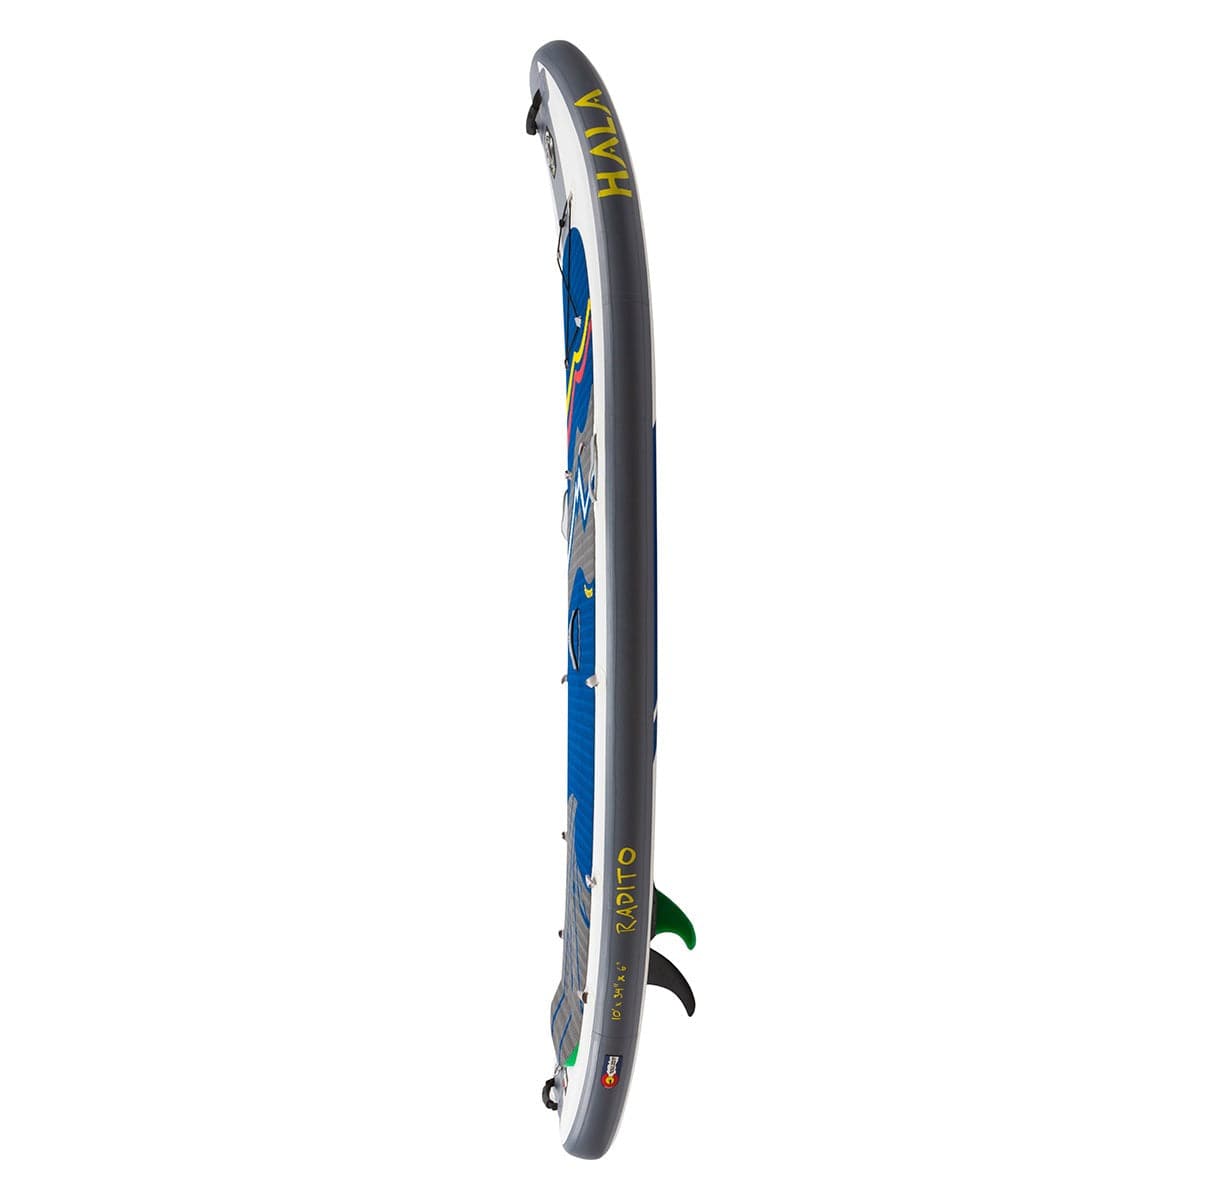 Featuring the Radito 10' Inflatable SUP inflatable sup, whitewater sup manufactured by Hala shown here from a third angle.